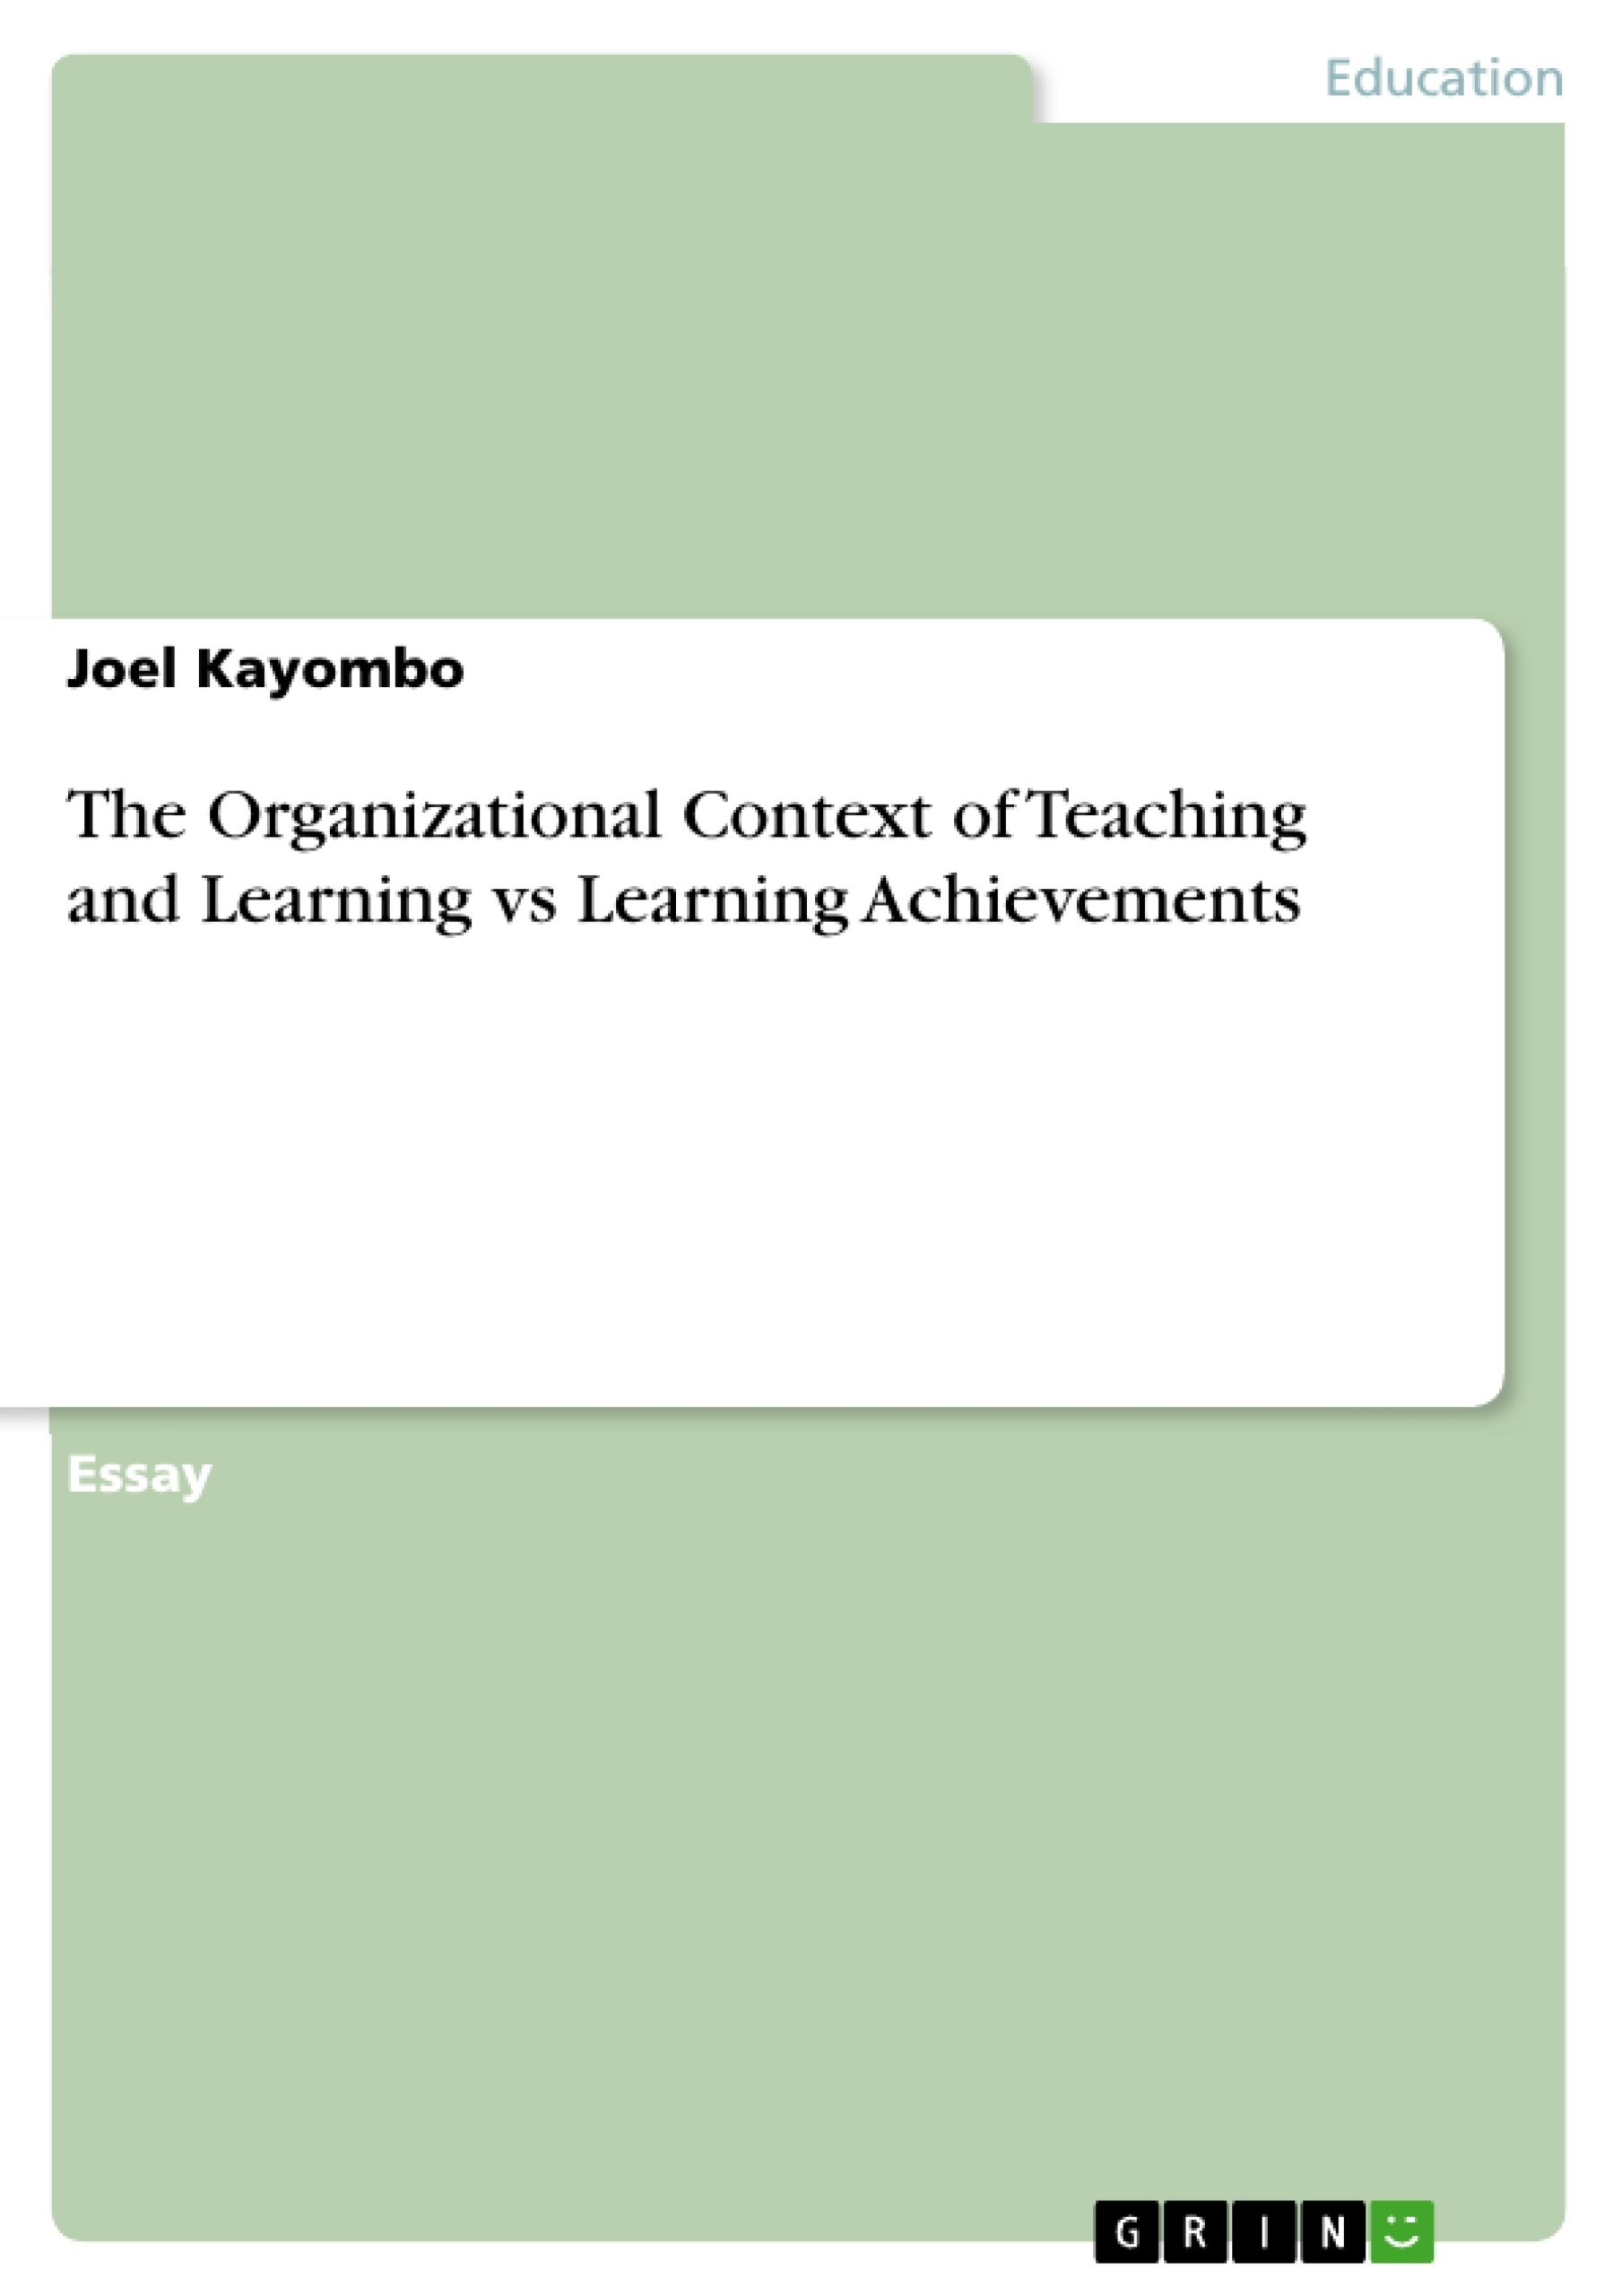 Title: The Organizational Context of Teaching and Learning vs Learning Achievements